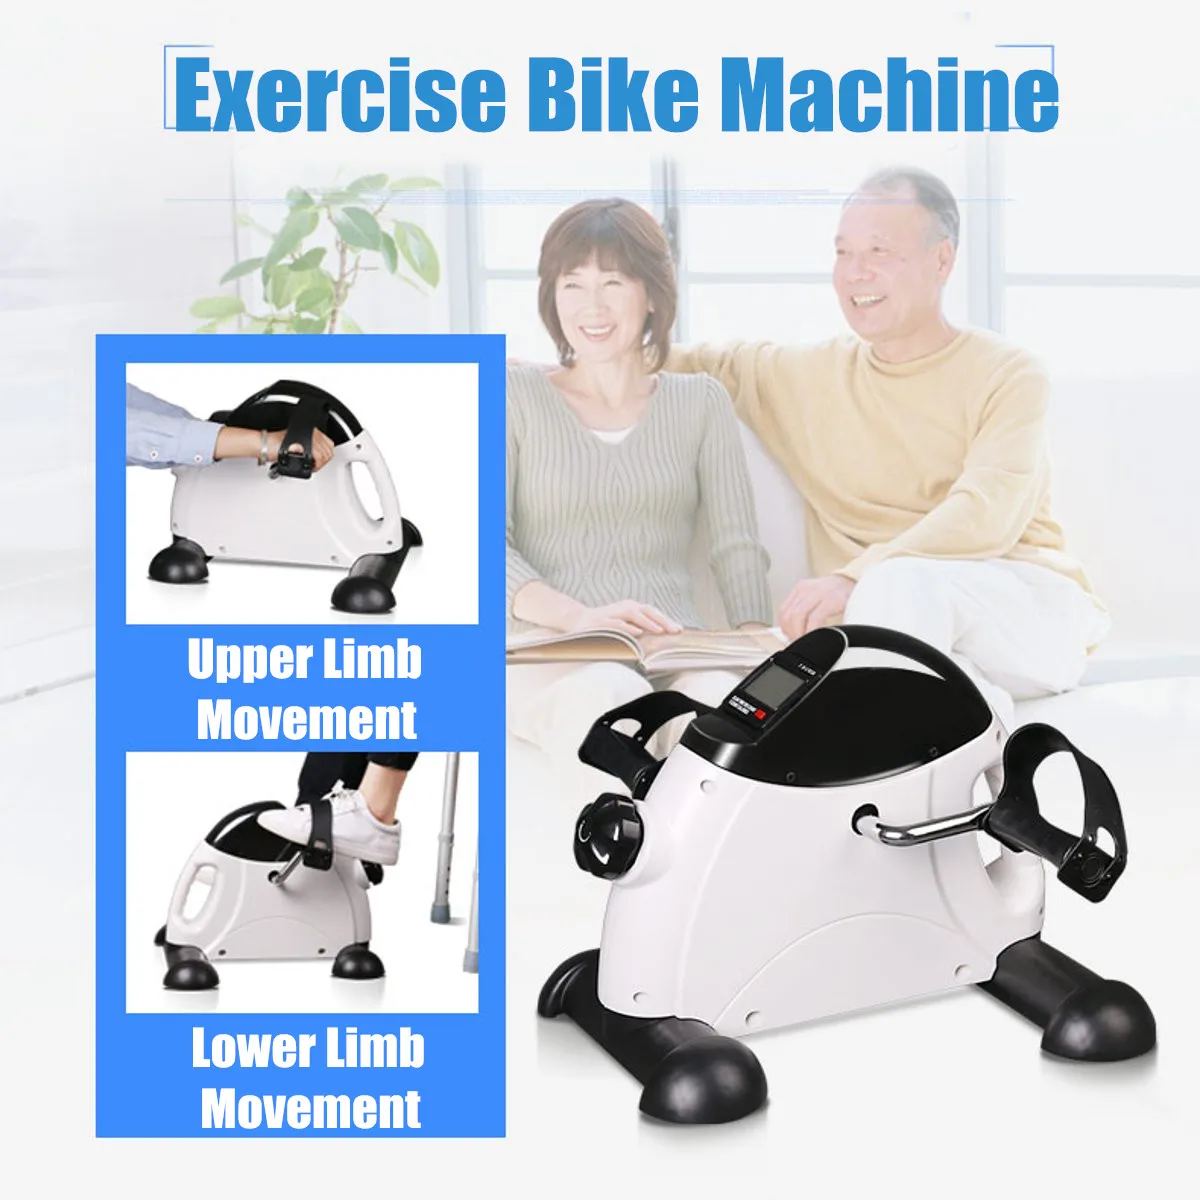 LED Display Home Exerciser Fitness Pedal Bike Exercise Indoor Trainer Exerciser Cycling Fitness Mini Pedal Arms Legs Physical